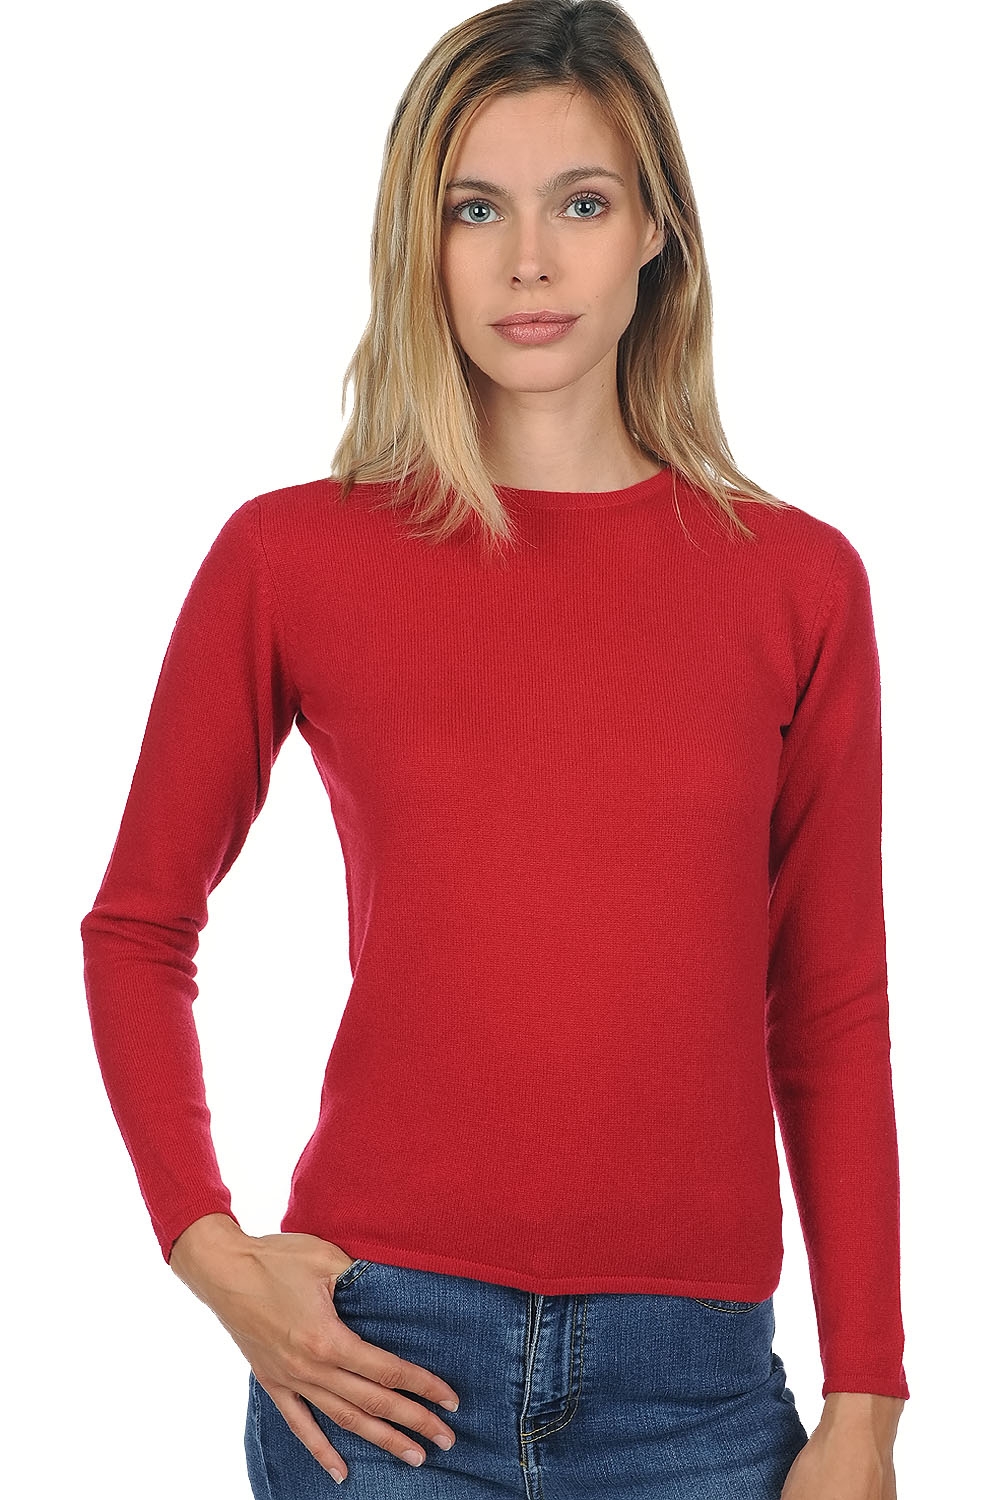 Cashmere ladies timeless classics line blood red s